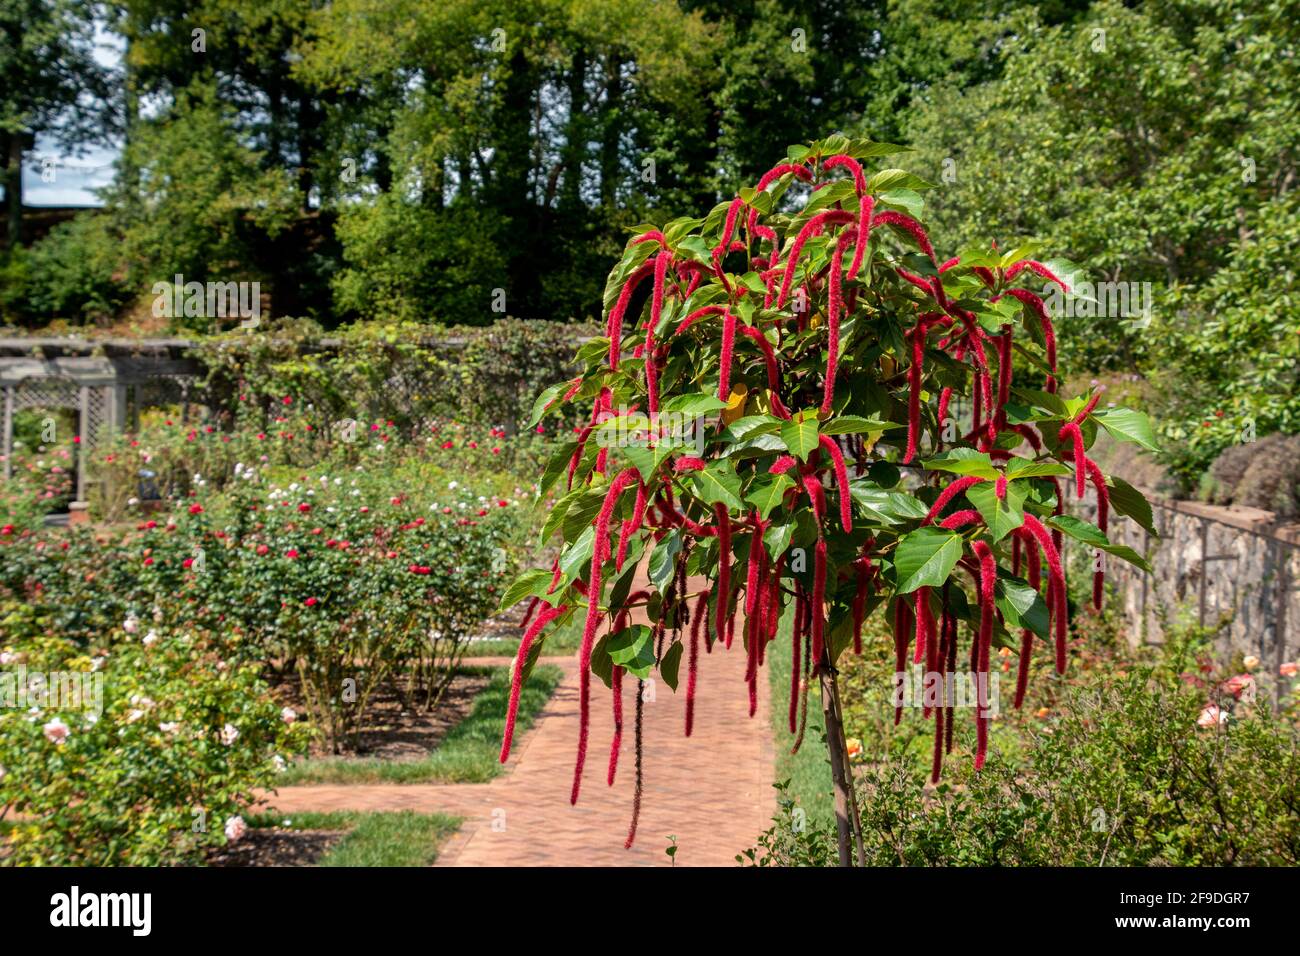 Acalypha Hispida with it's distinctive red flowers Stock Photo